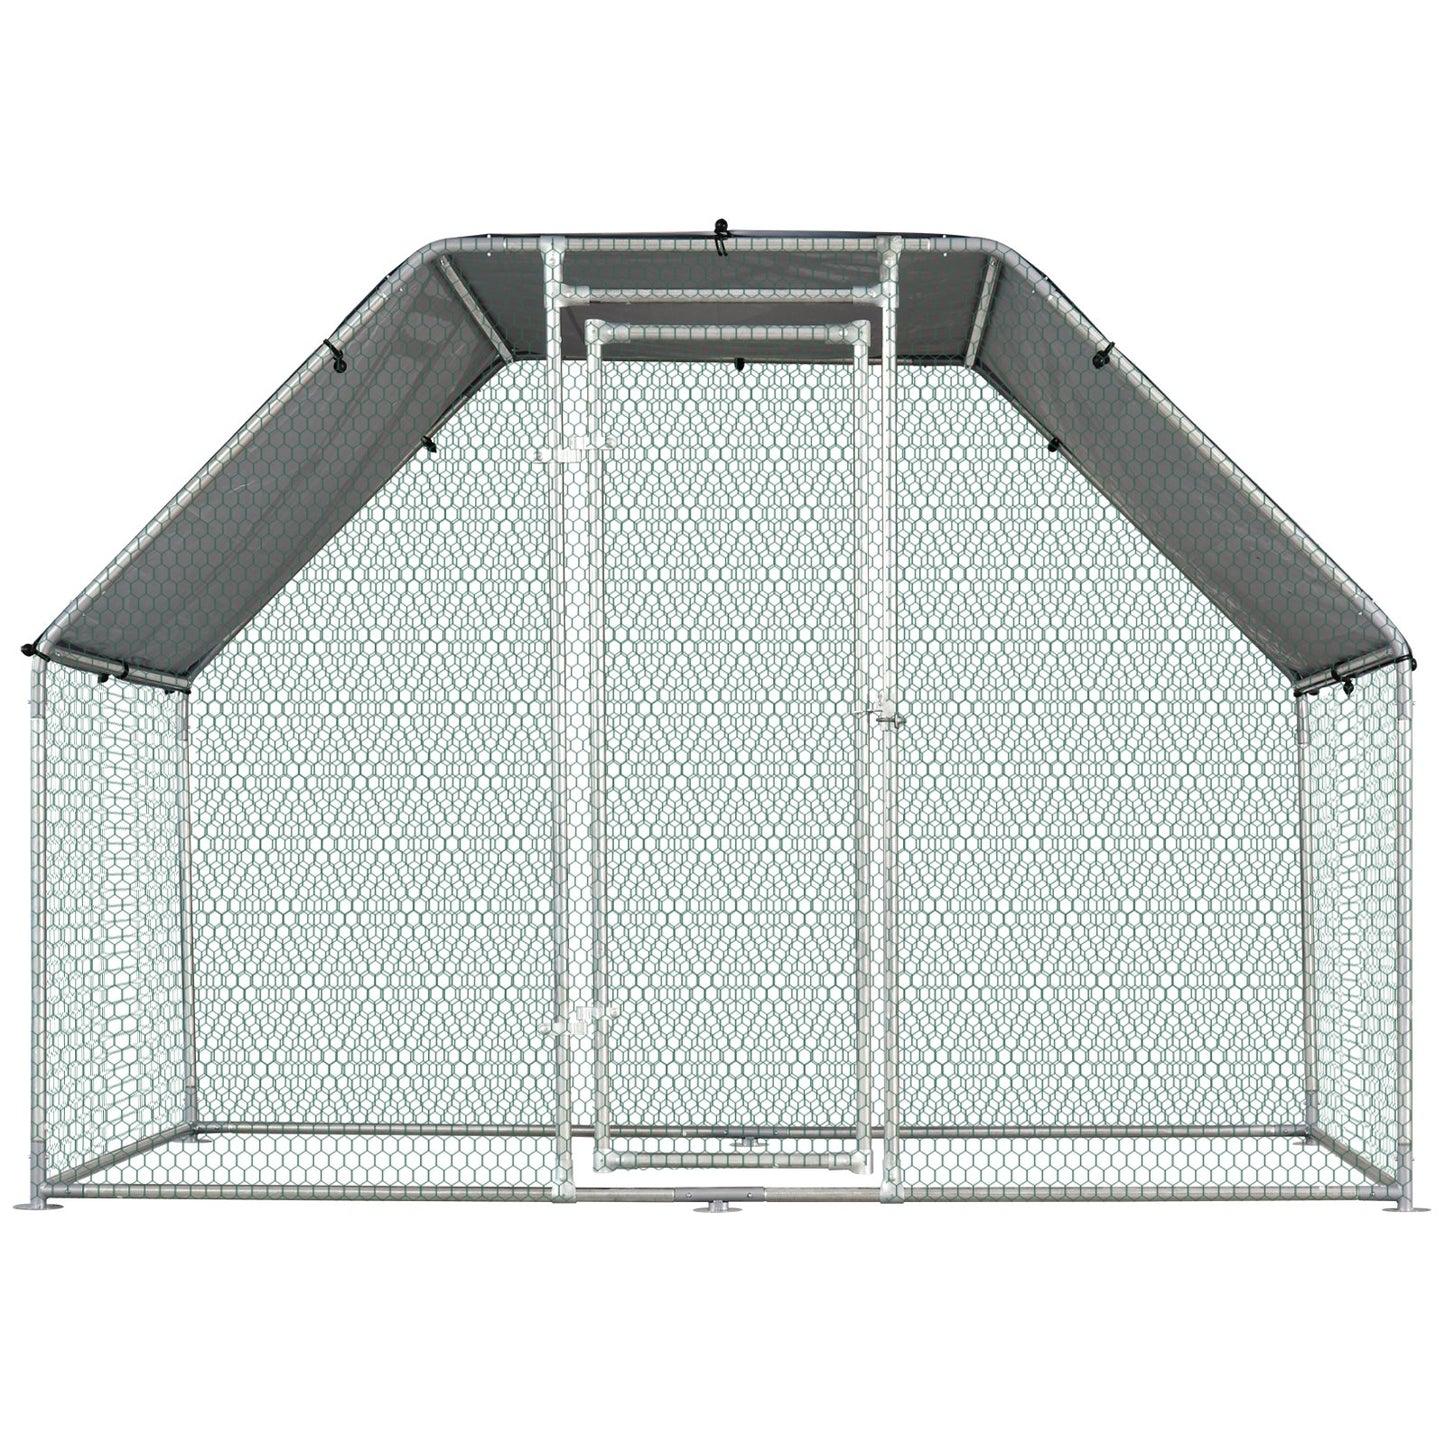 PawHut Large Metal Chicken House Walk-In Chicken Coop Run Cage w/ Cover Outdoor, 280W x 190D x 195H cm